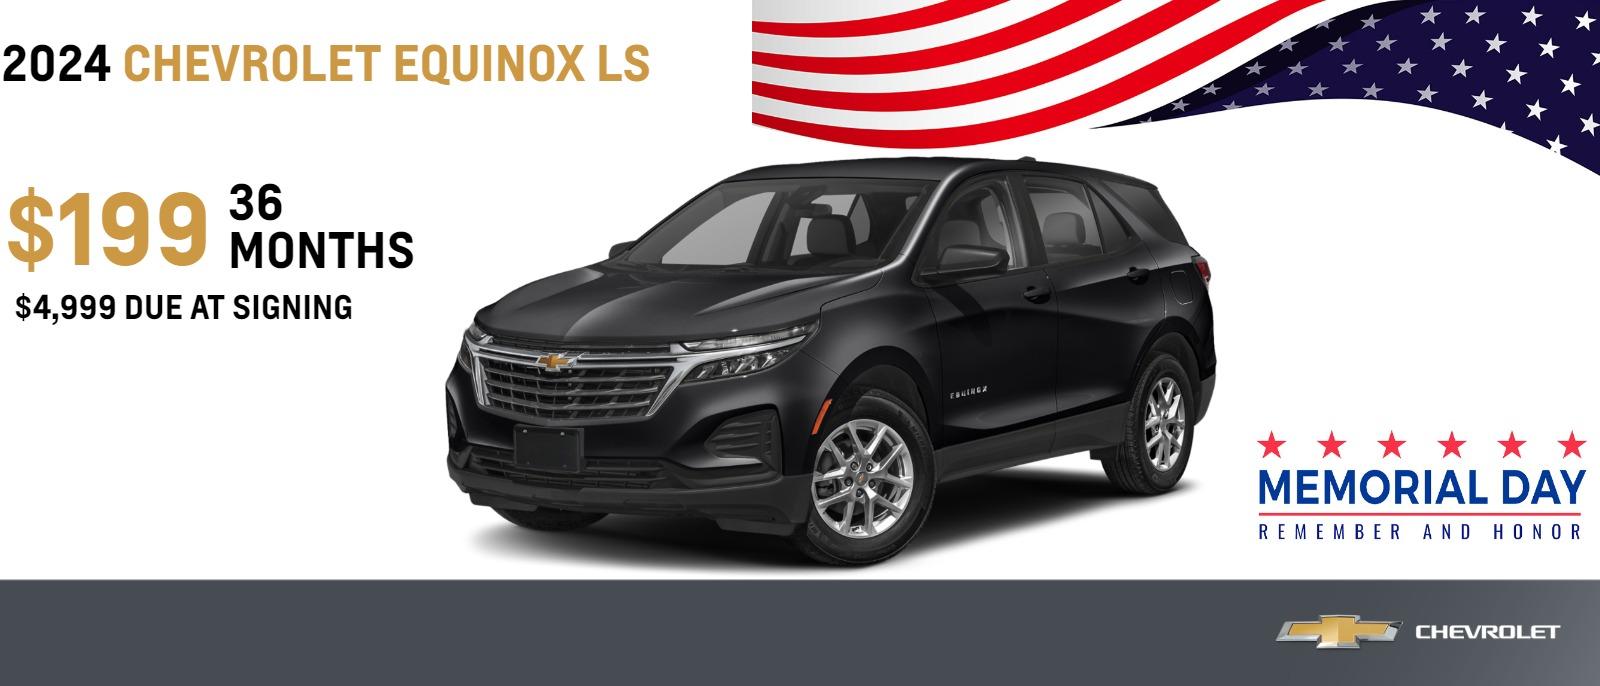 2024 CHEVROLET EQUINOX LS
$199 | 36 months | $4,999 due at signing